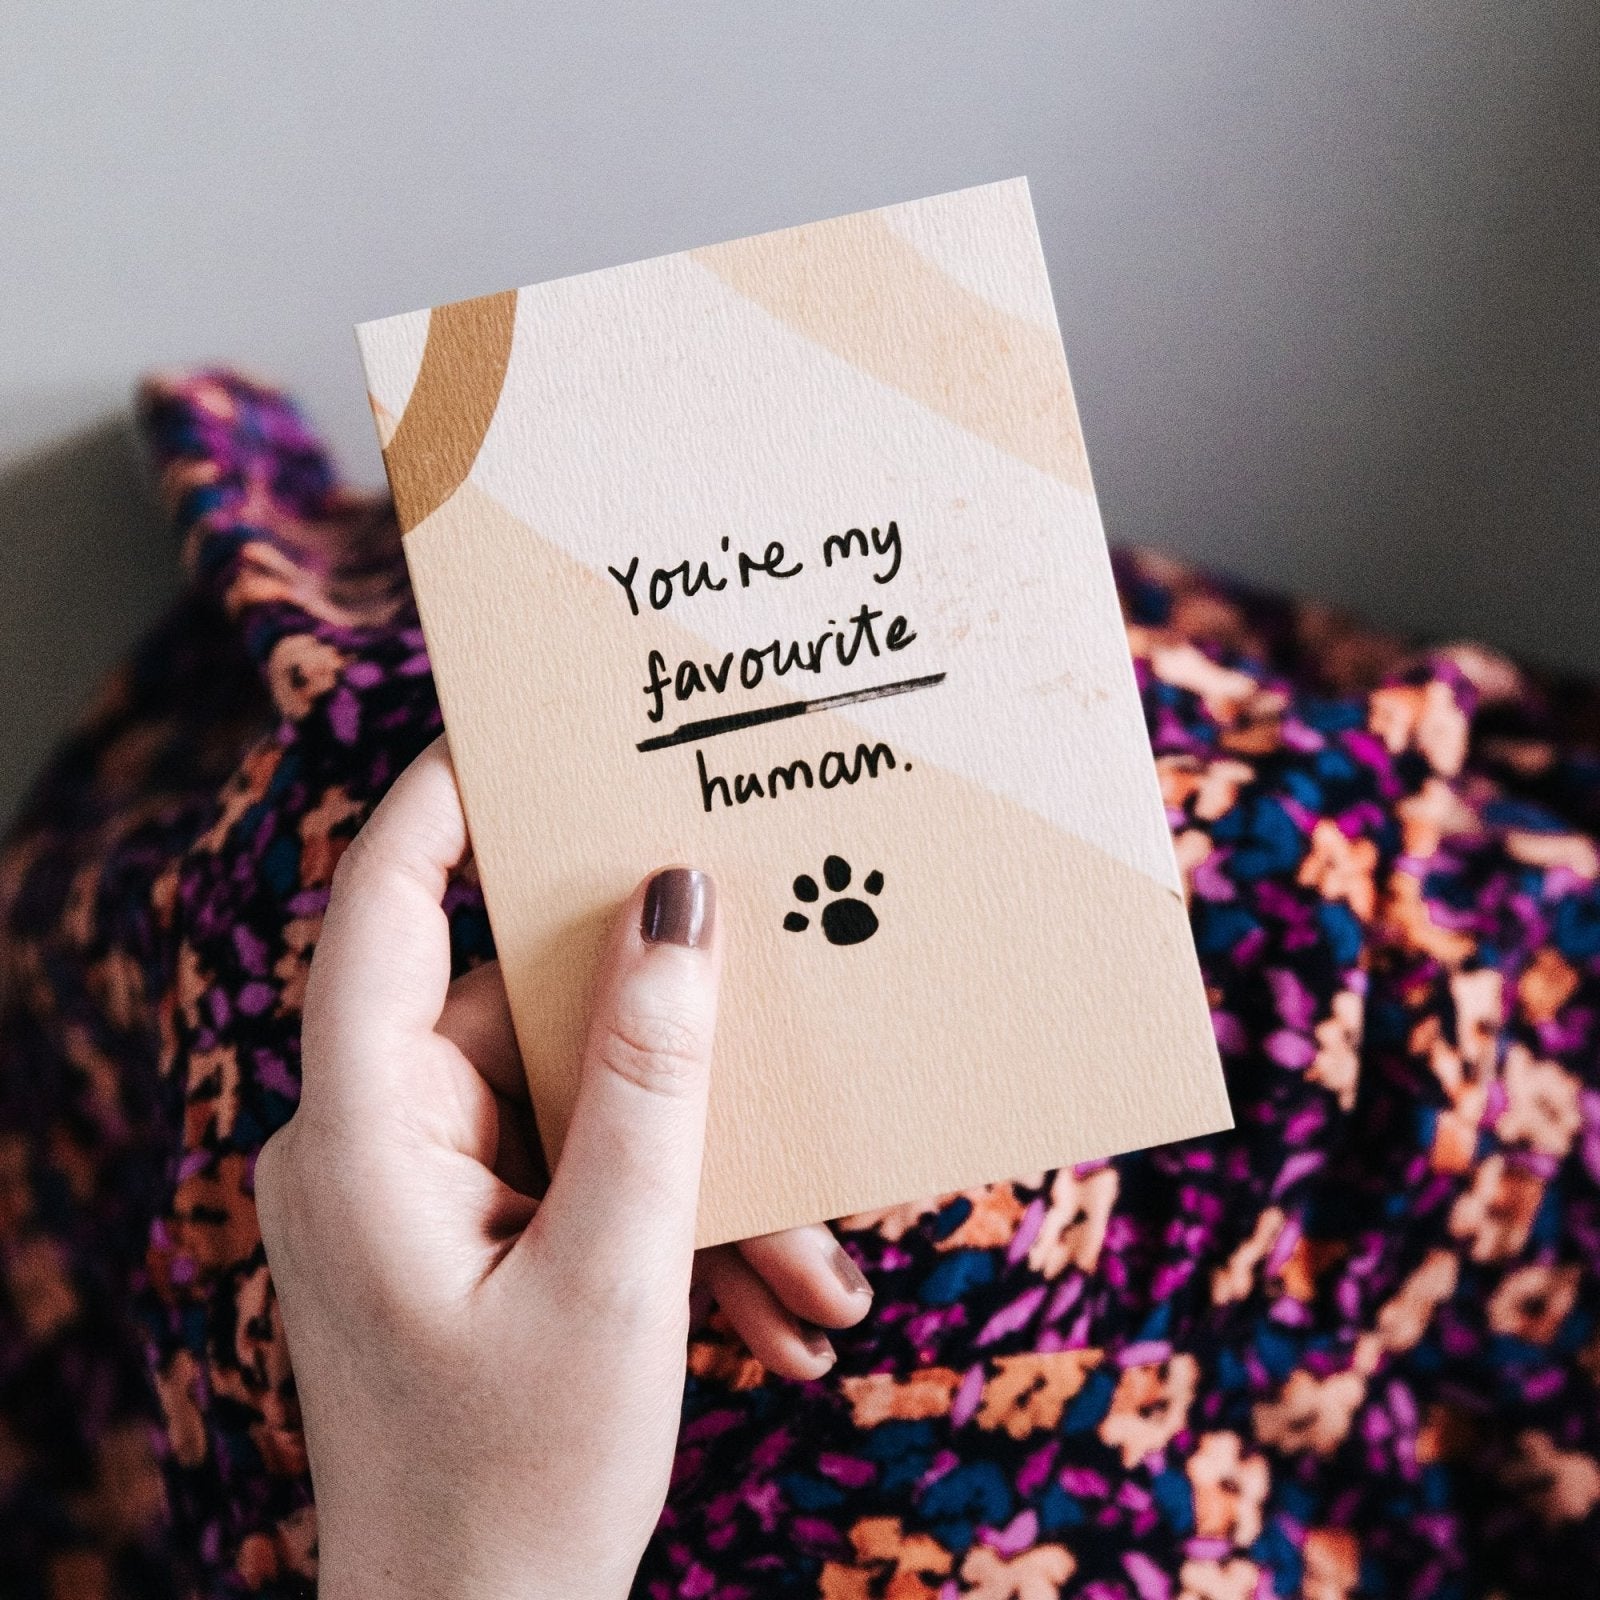 Favourite Human Card from Dog or Cat - I am Nat Ltd - Greeting Card